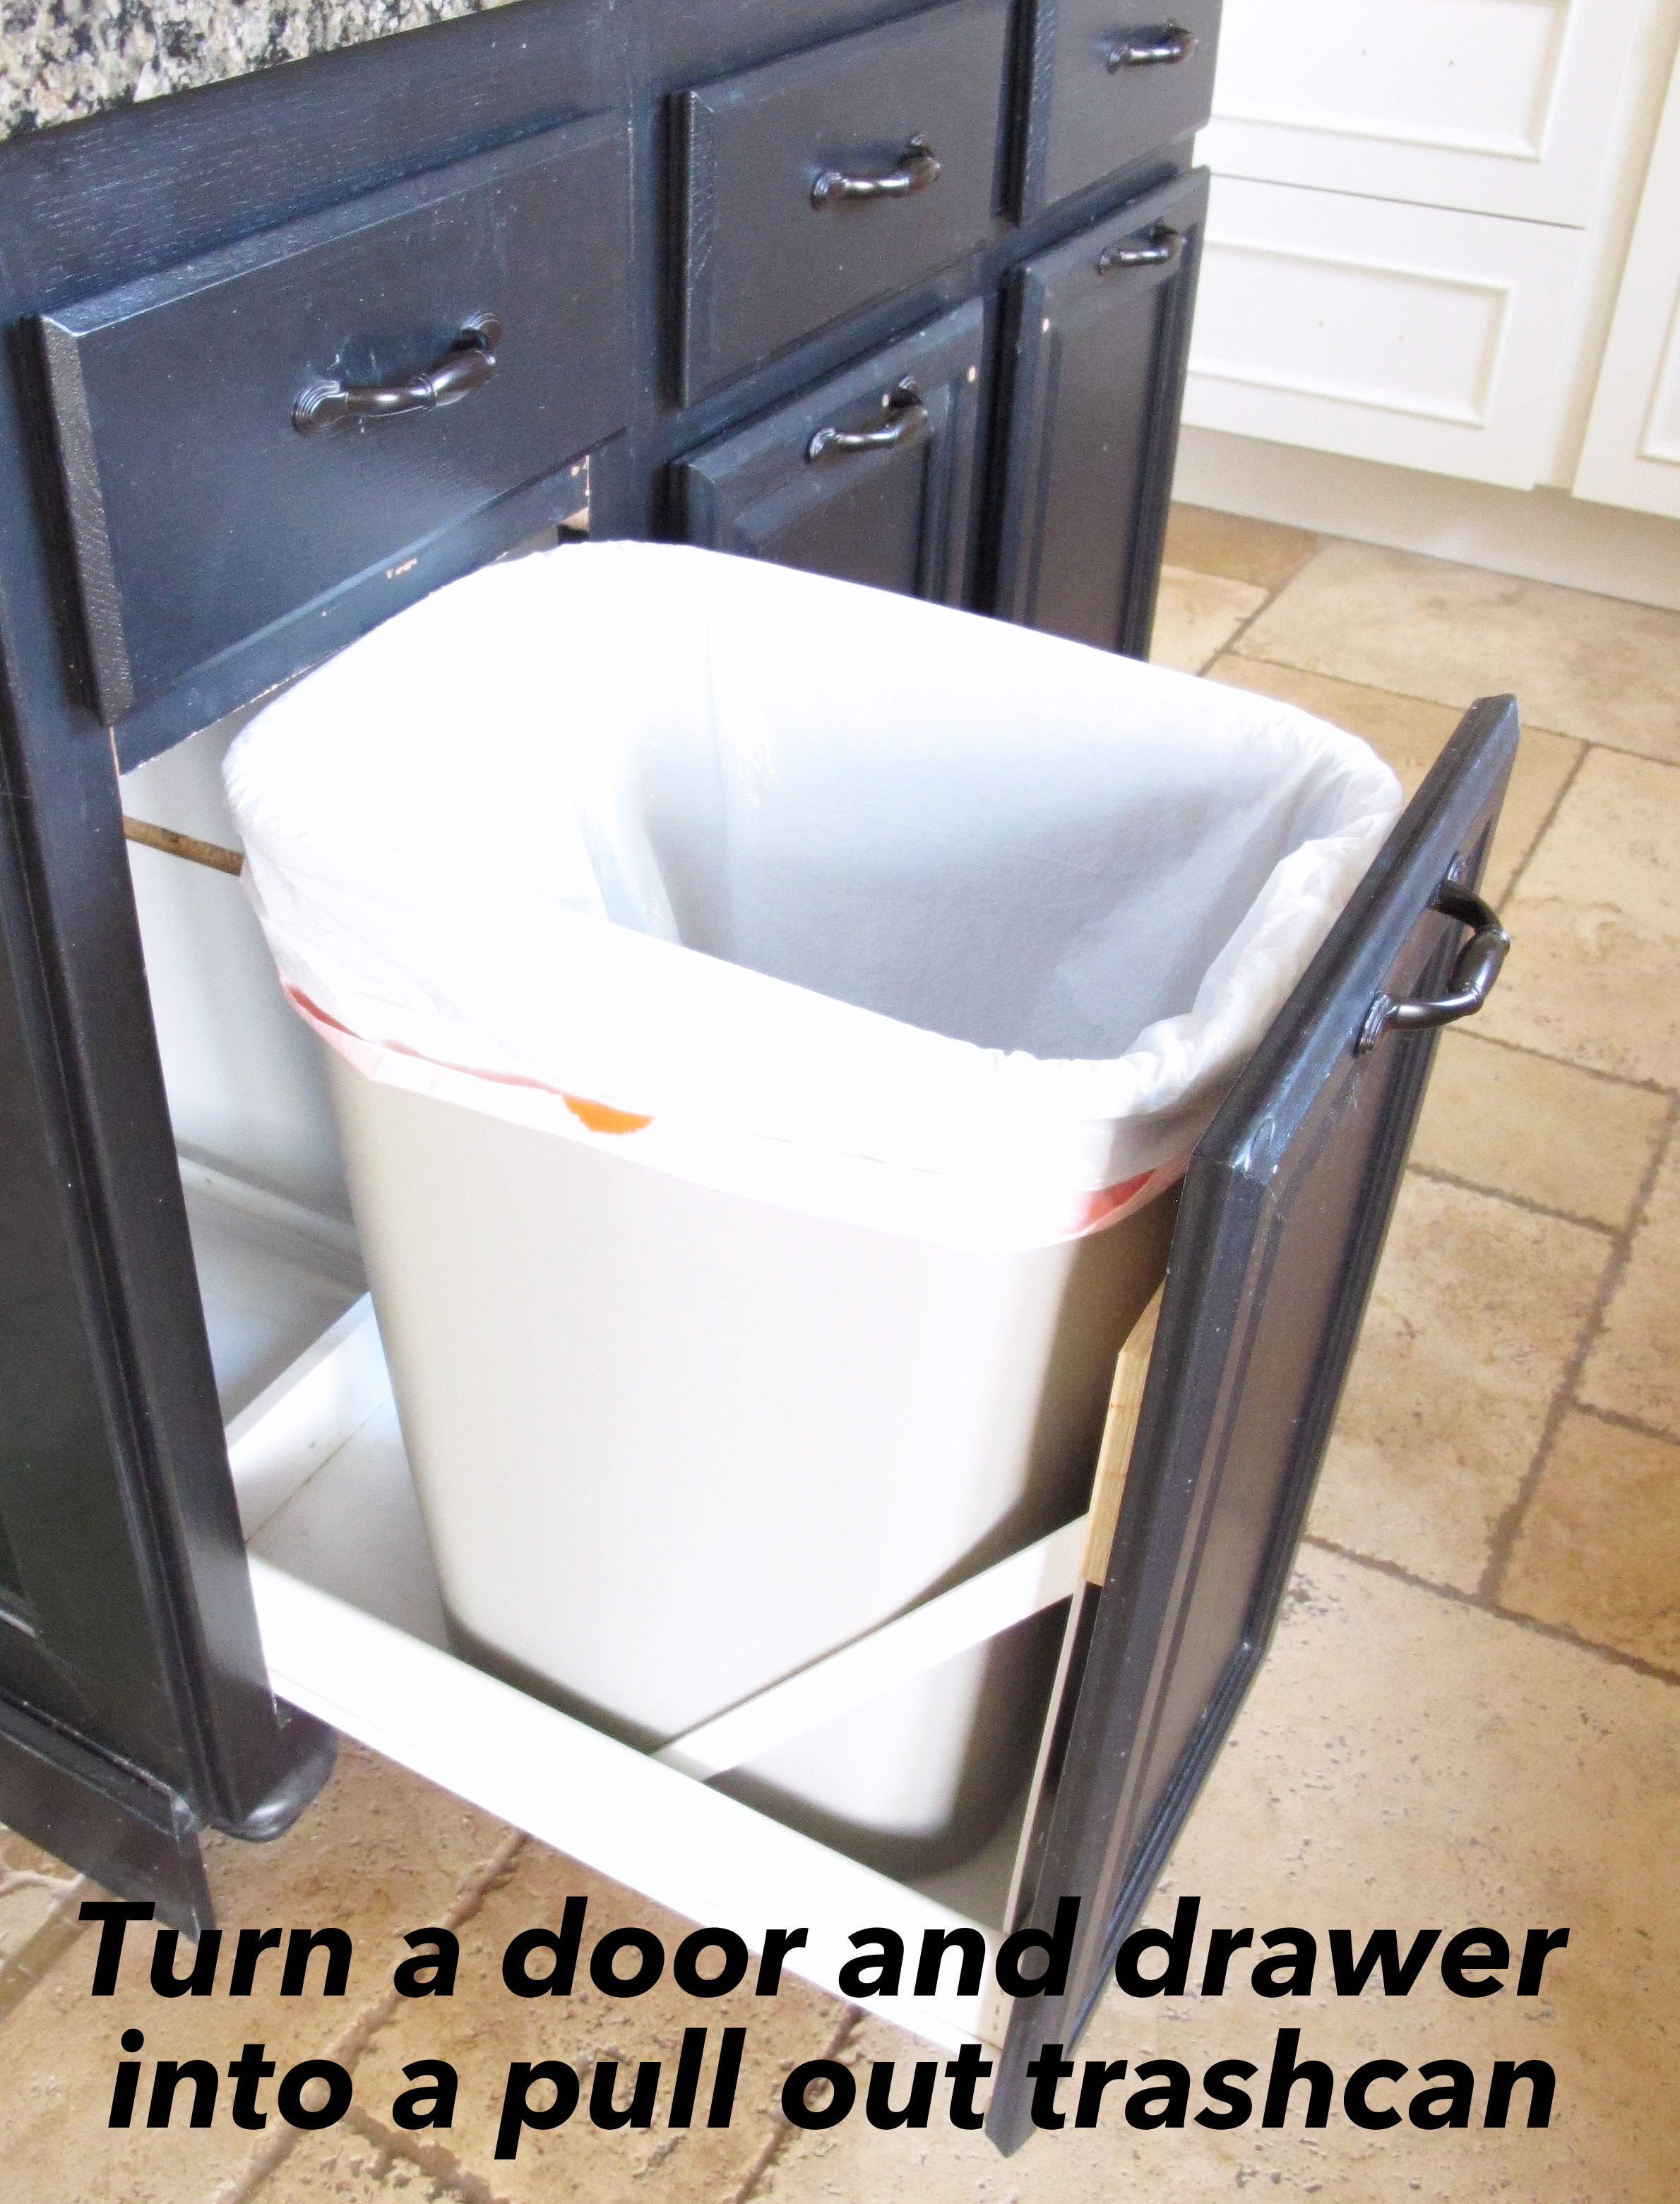 Turn a door and a drawer into a pull out trash can